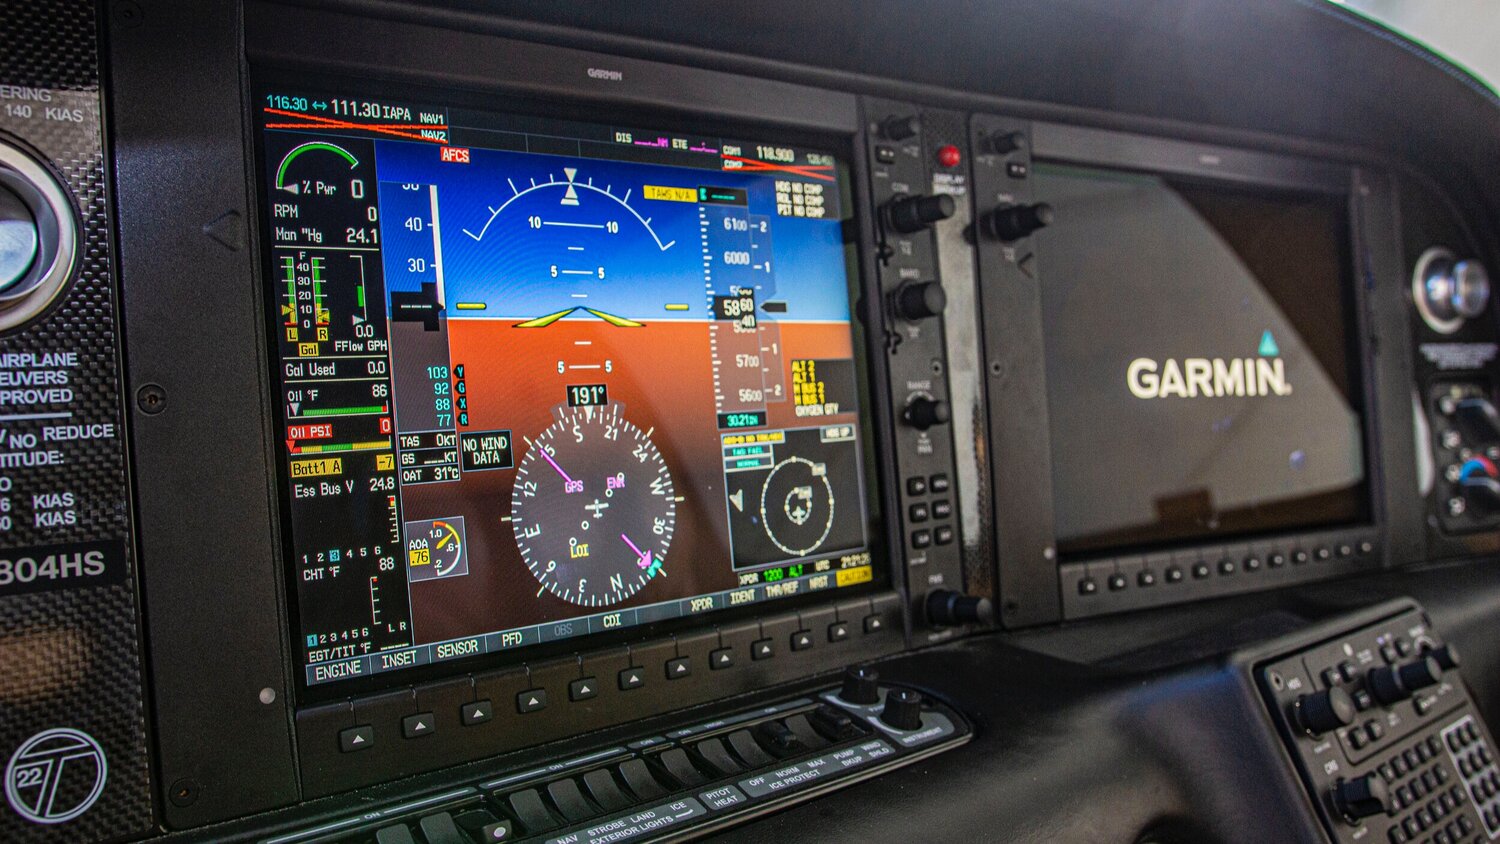 As with all Cirrus aircraft, as soon as you get in the cockpit, you get the feel that the aircraft was designed and built around the pilot and passengers. Large screens, easy to identify switches, a flight management system and of course, Garmin G1000 avionics. | N804HS